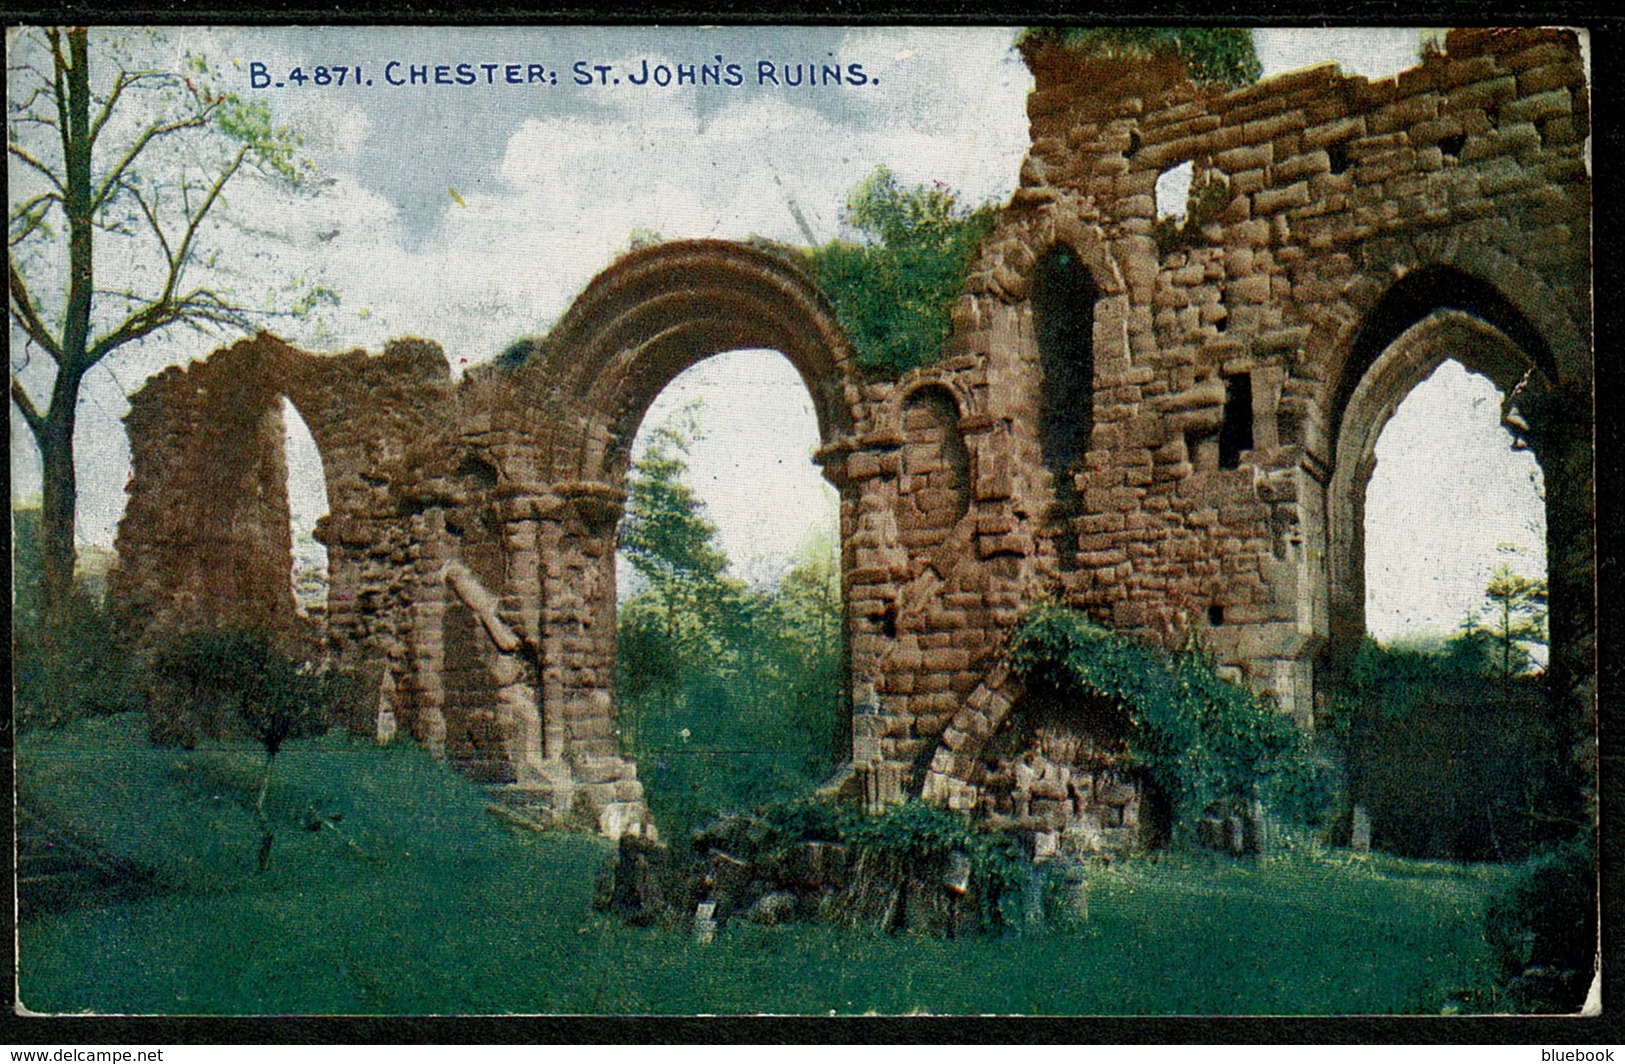 Ref 1240 - Early Postcard - St John's Riuns Chester - Unusual C S Triangle Mark On Reverse - Chester